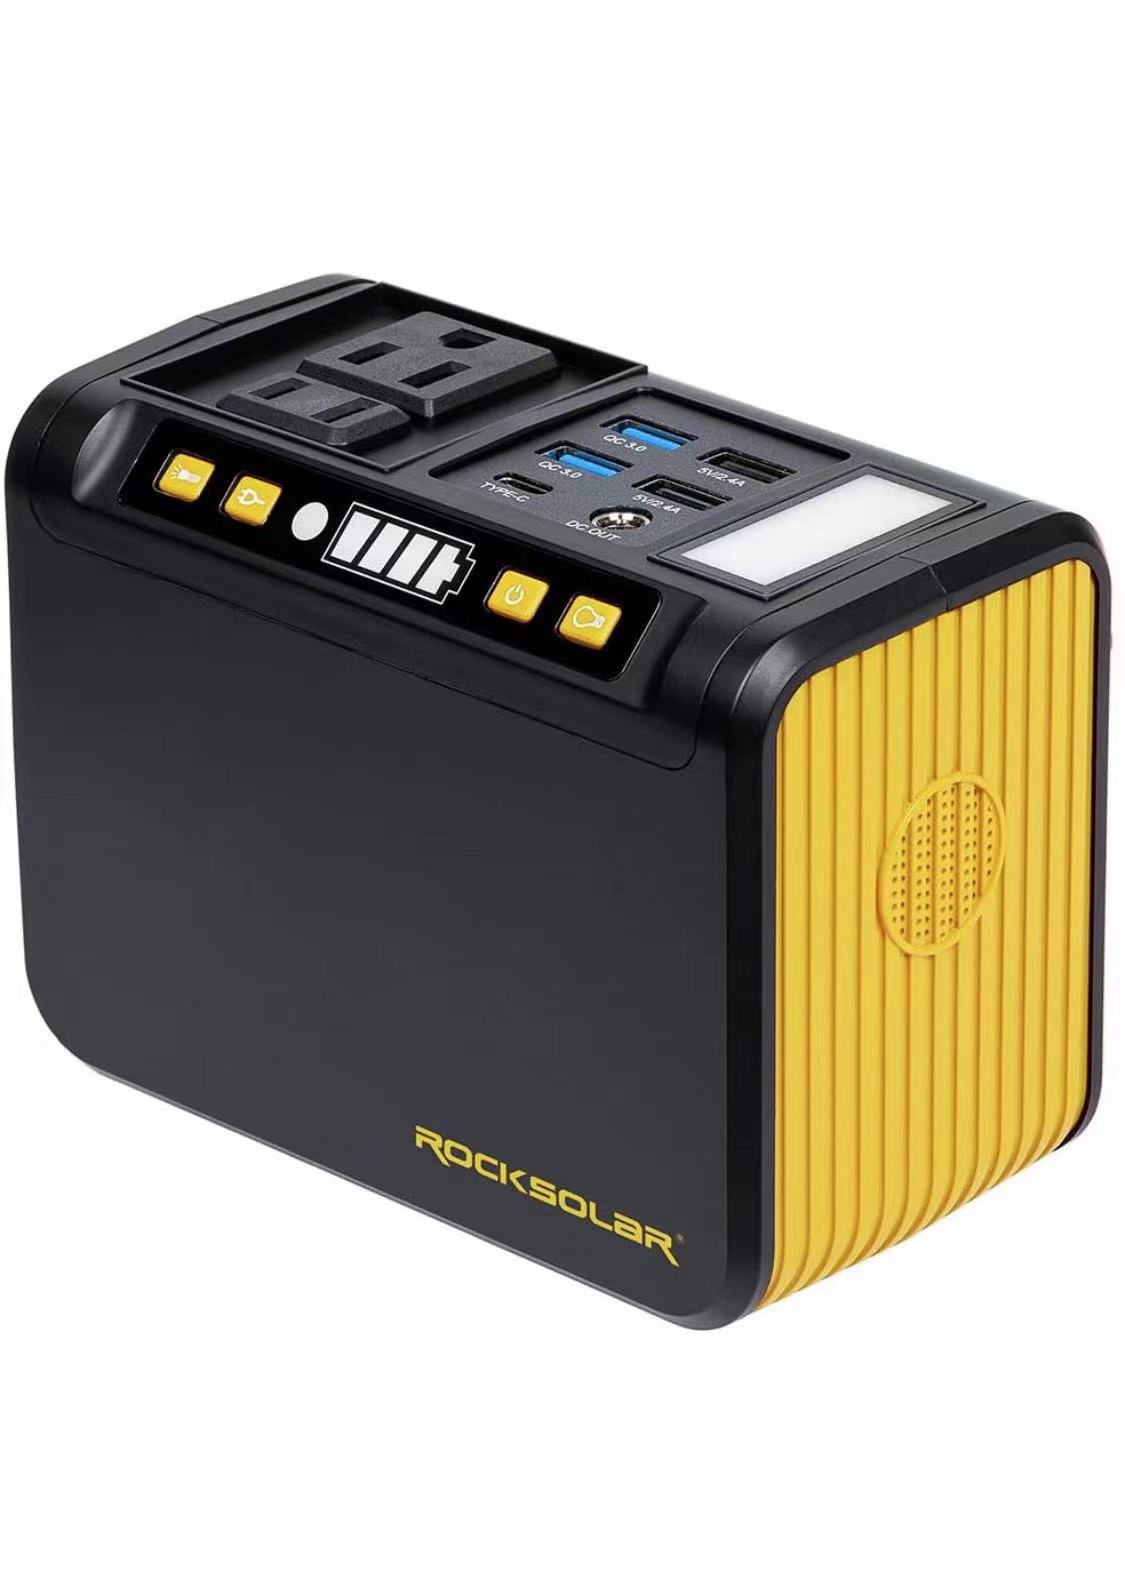 Portable Lithium battery Power Station/Solar generator 88Wh, 80W AC/12V DC outlet + 5 USB, LED flashlight, ultra-lightweight (1.9LB), easily fits into